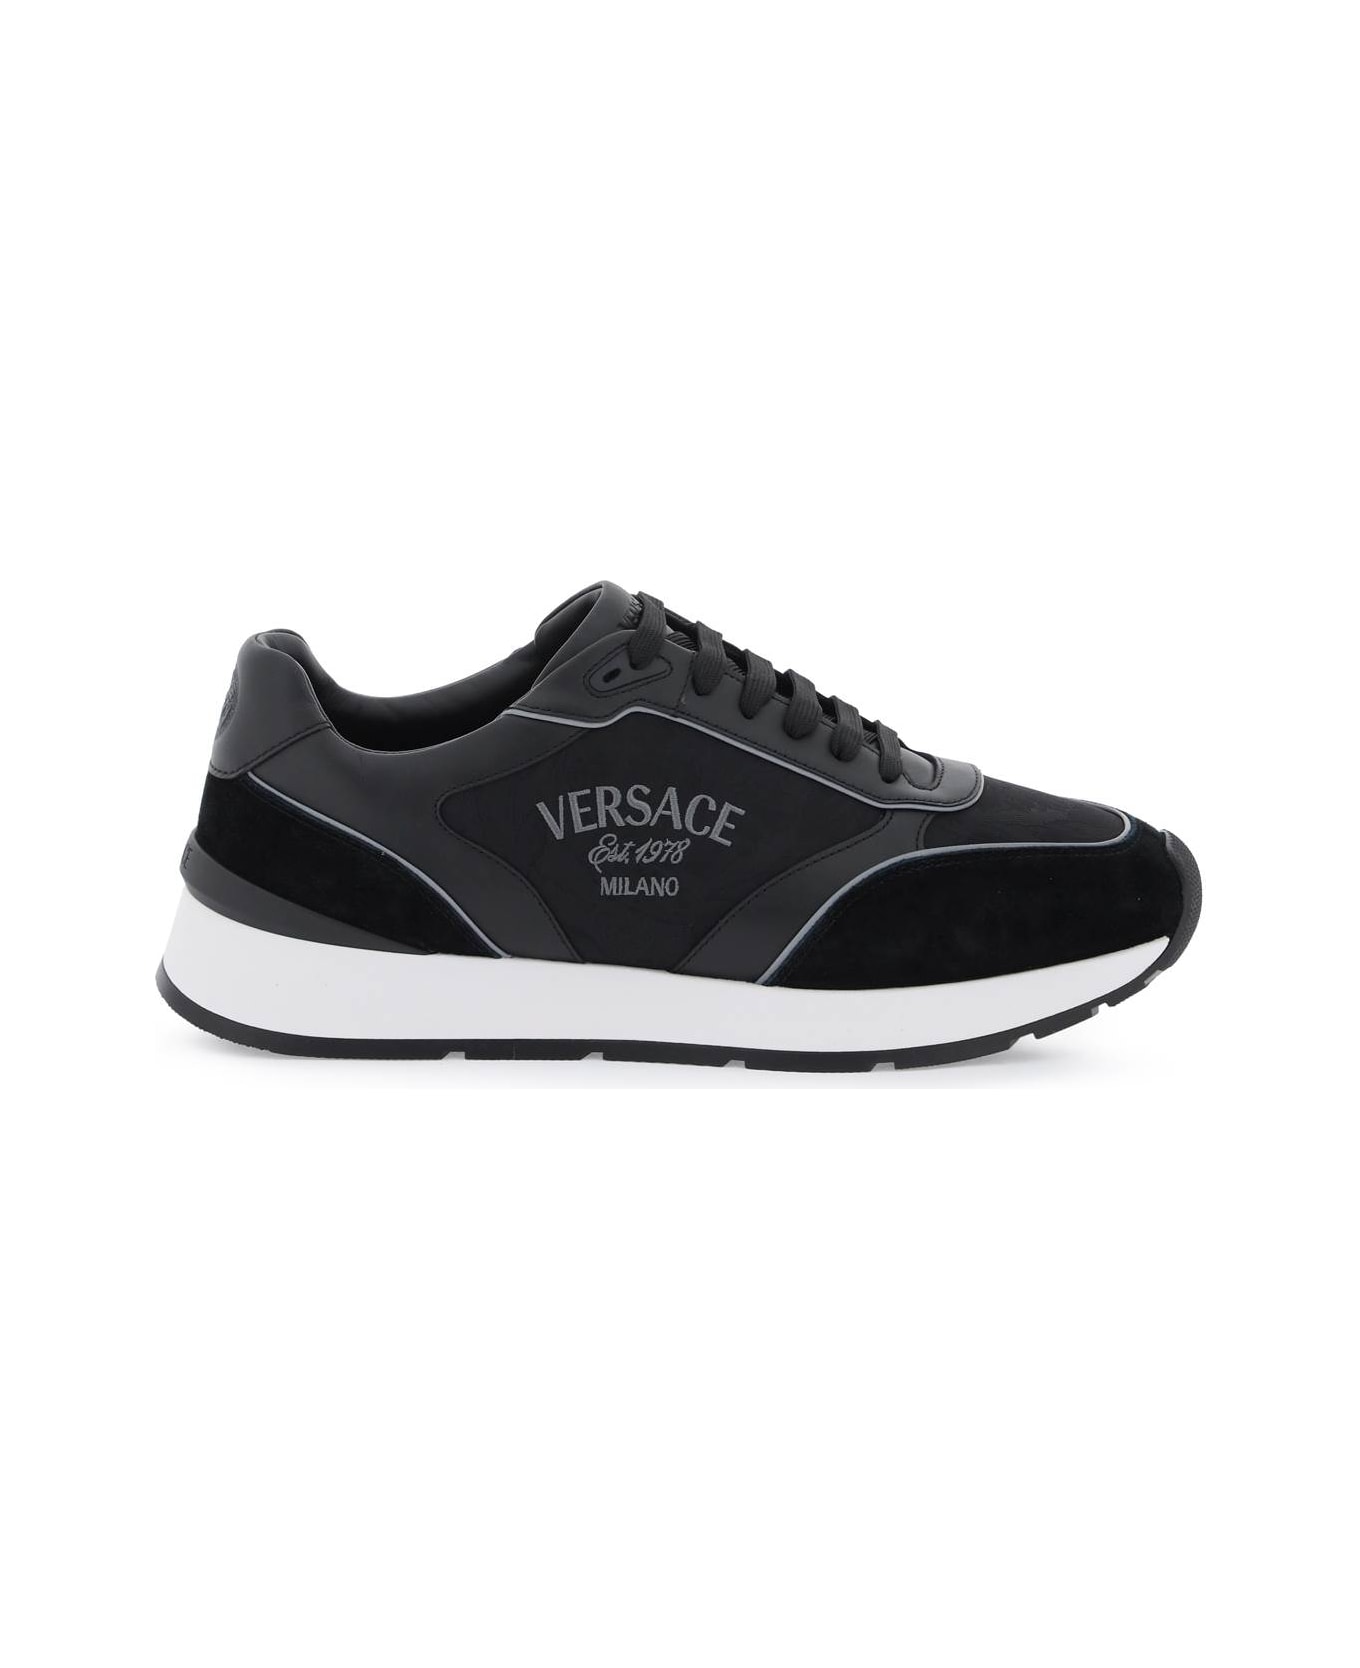 Versace Milano Round-toe Lace-up Sneakers - BLACK (Black) スニーカー